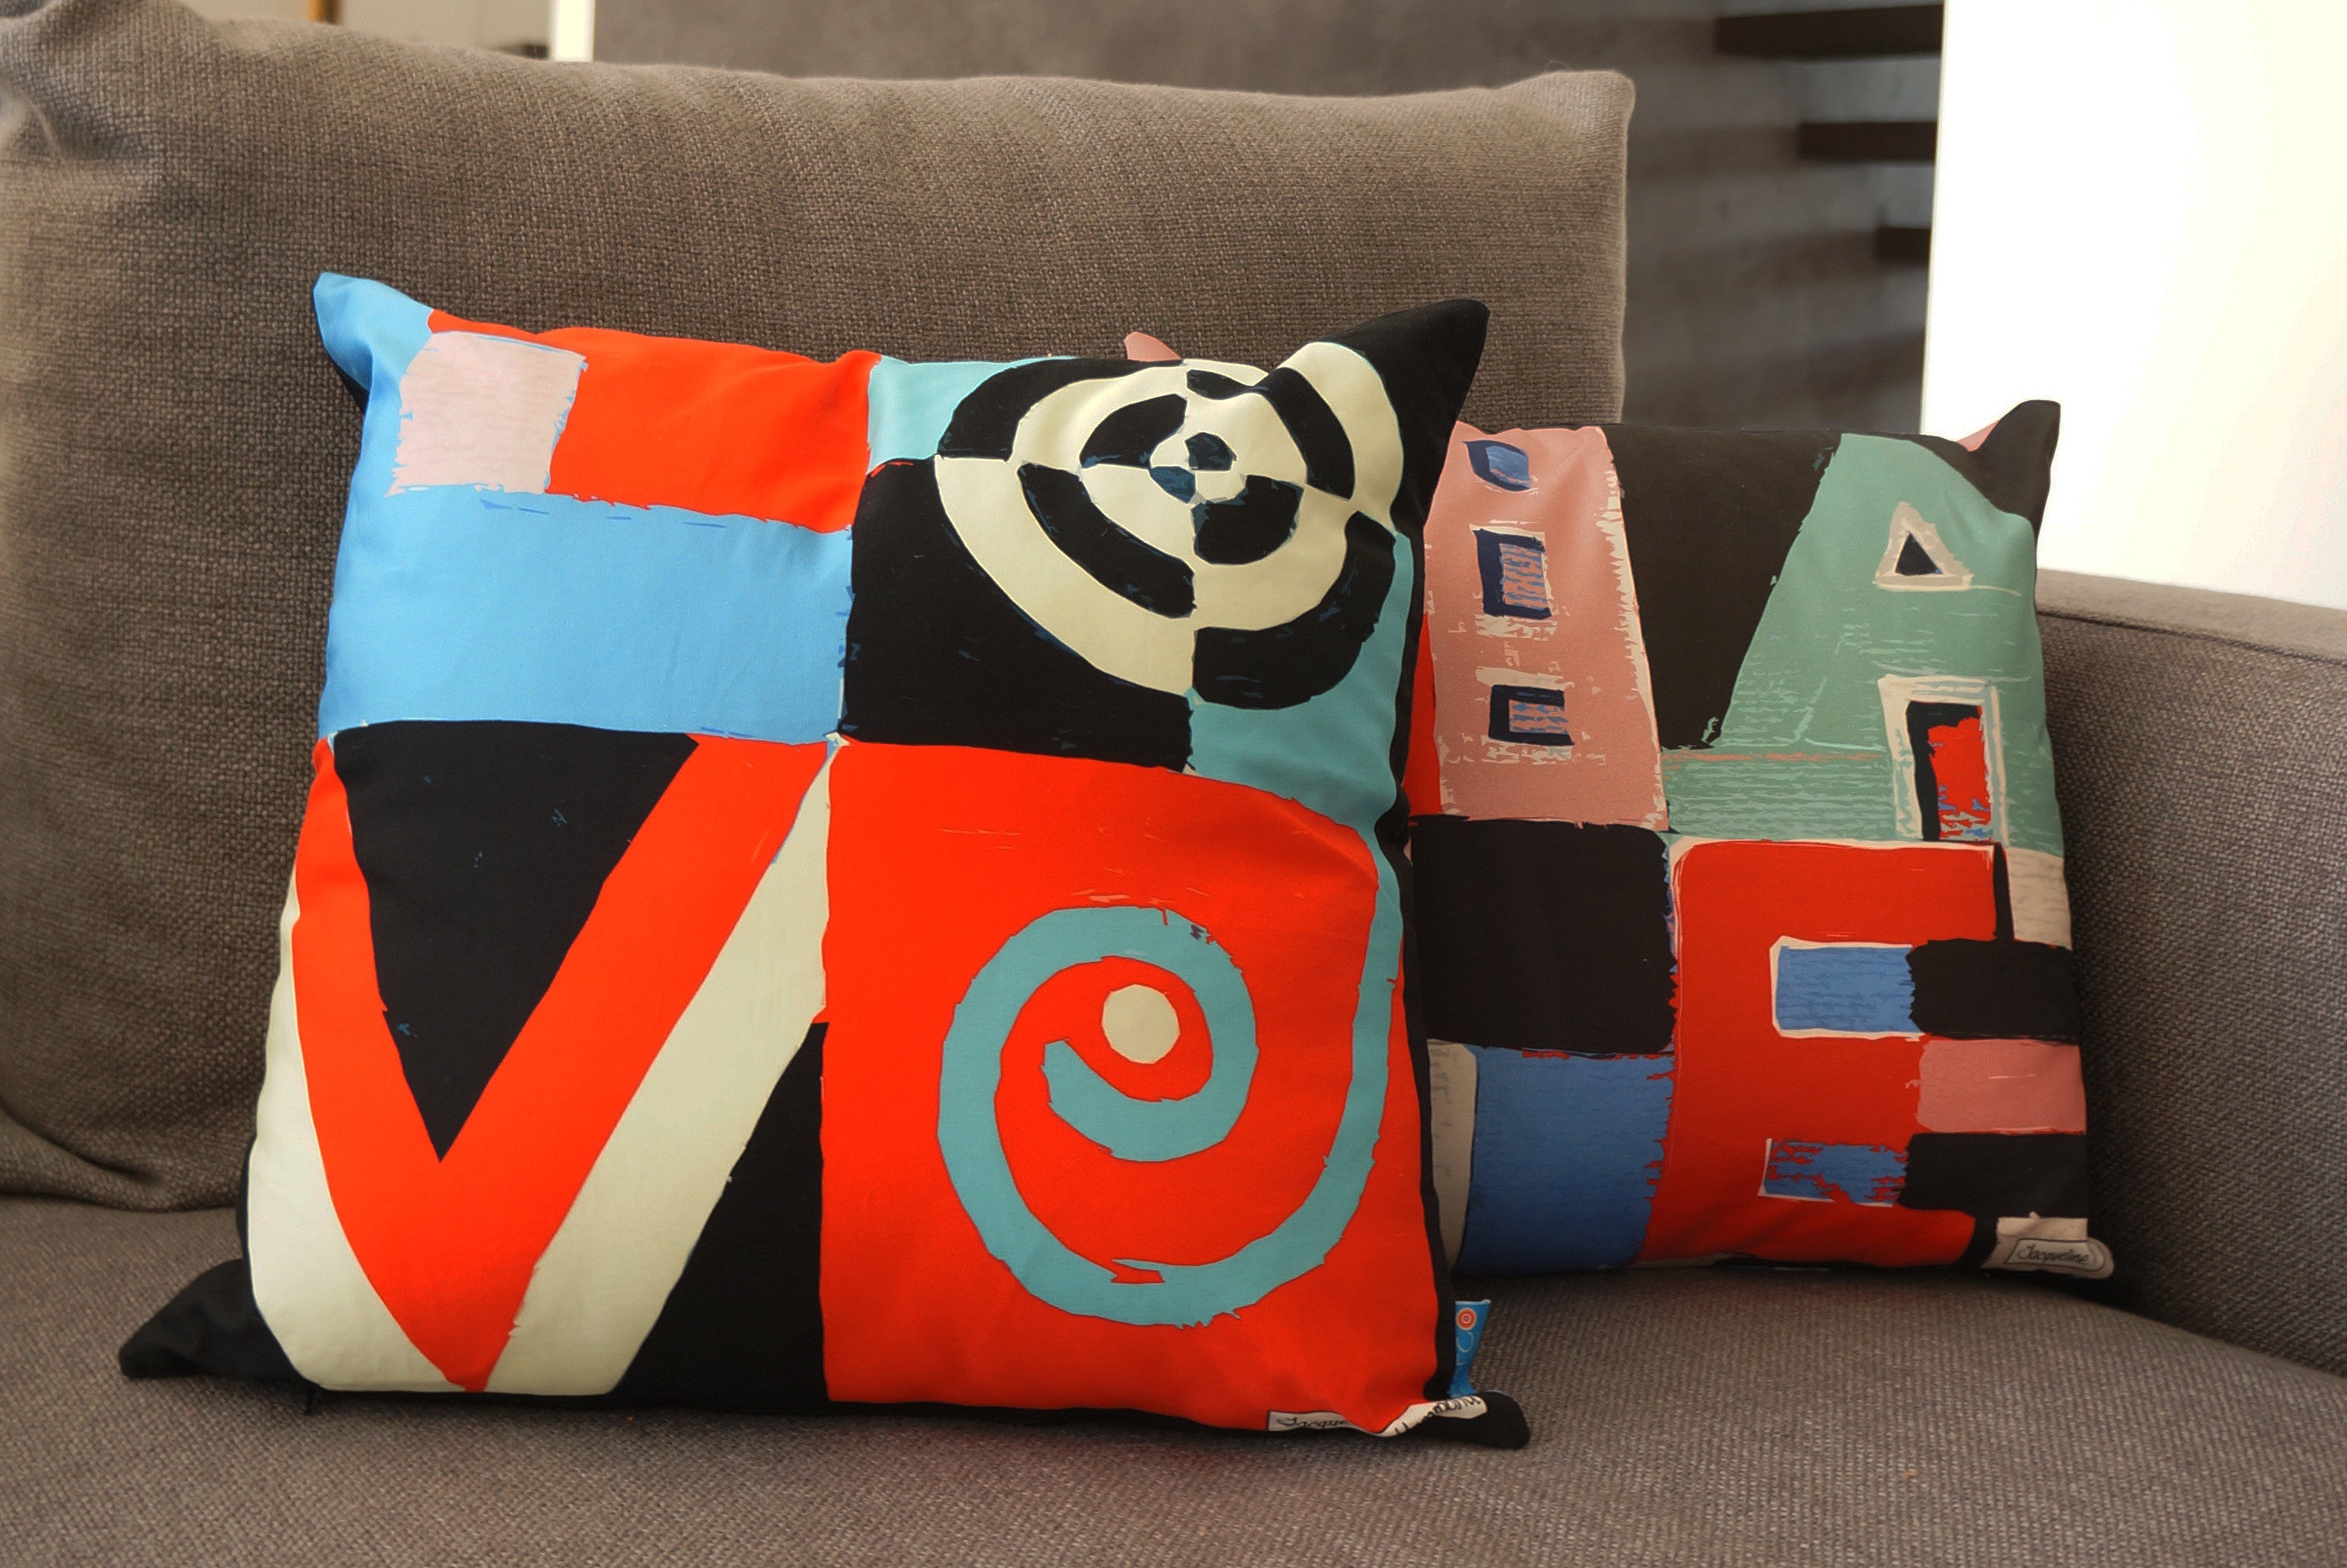 The Love / Hate Double Sided Word Art Cushion  Smart Deco Homeware Lighting and Art by Jacqueline hammond